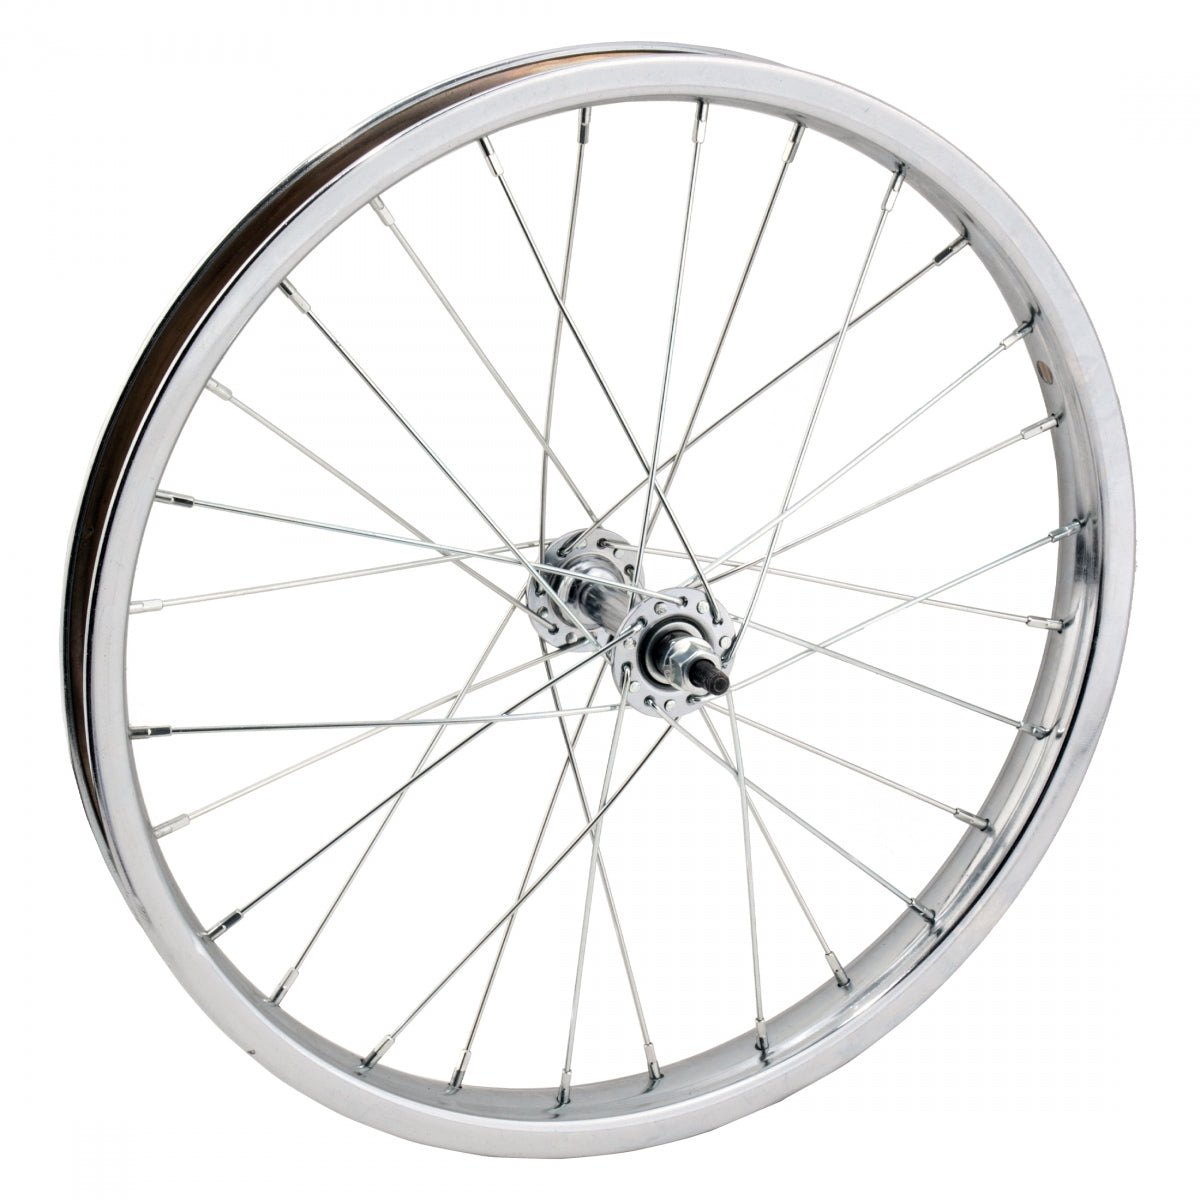 WheelMaster 18" x 1.75 Front Bicycle Wheel, 28H, Steel, Bolt On, Silver